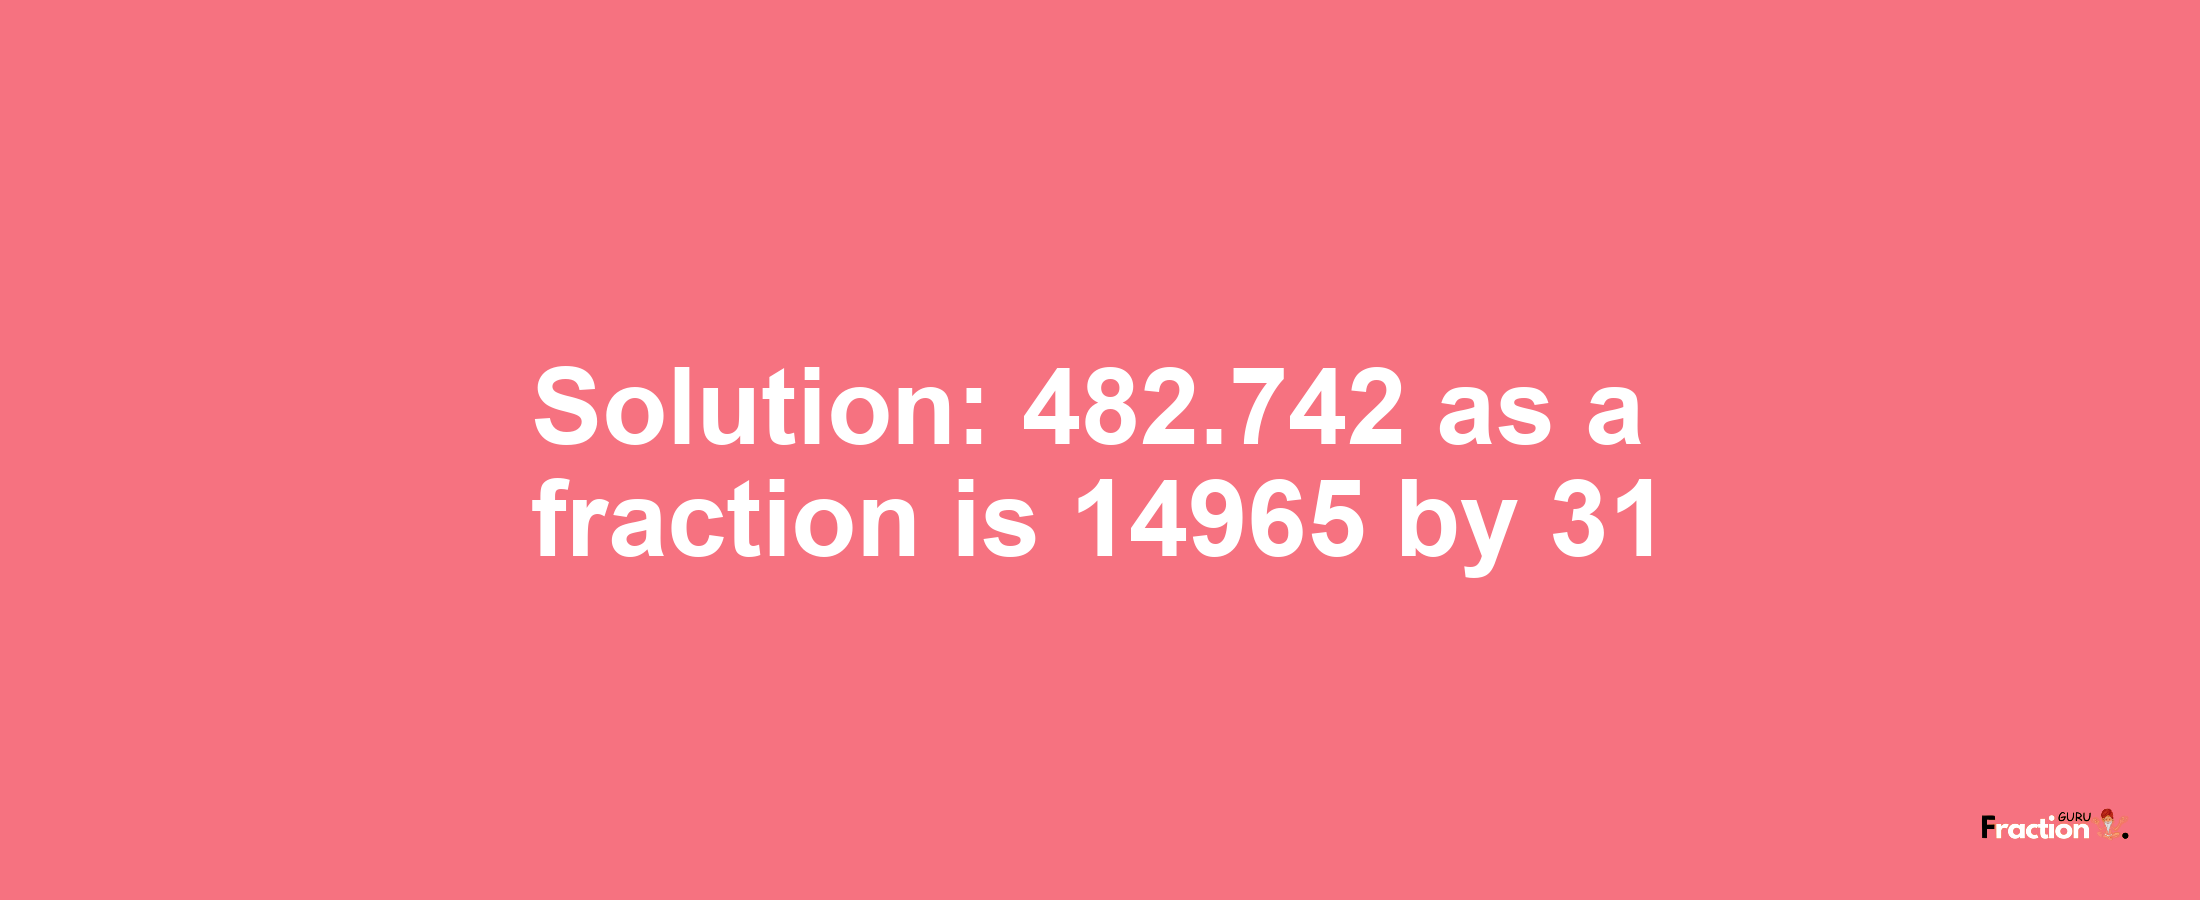 Solution:482.742 as a fraction is 14965/31